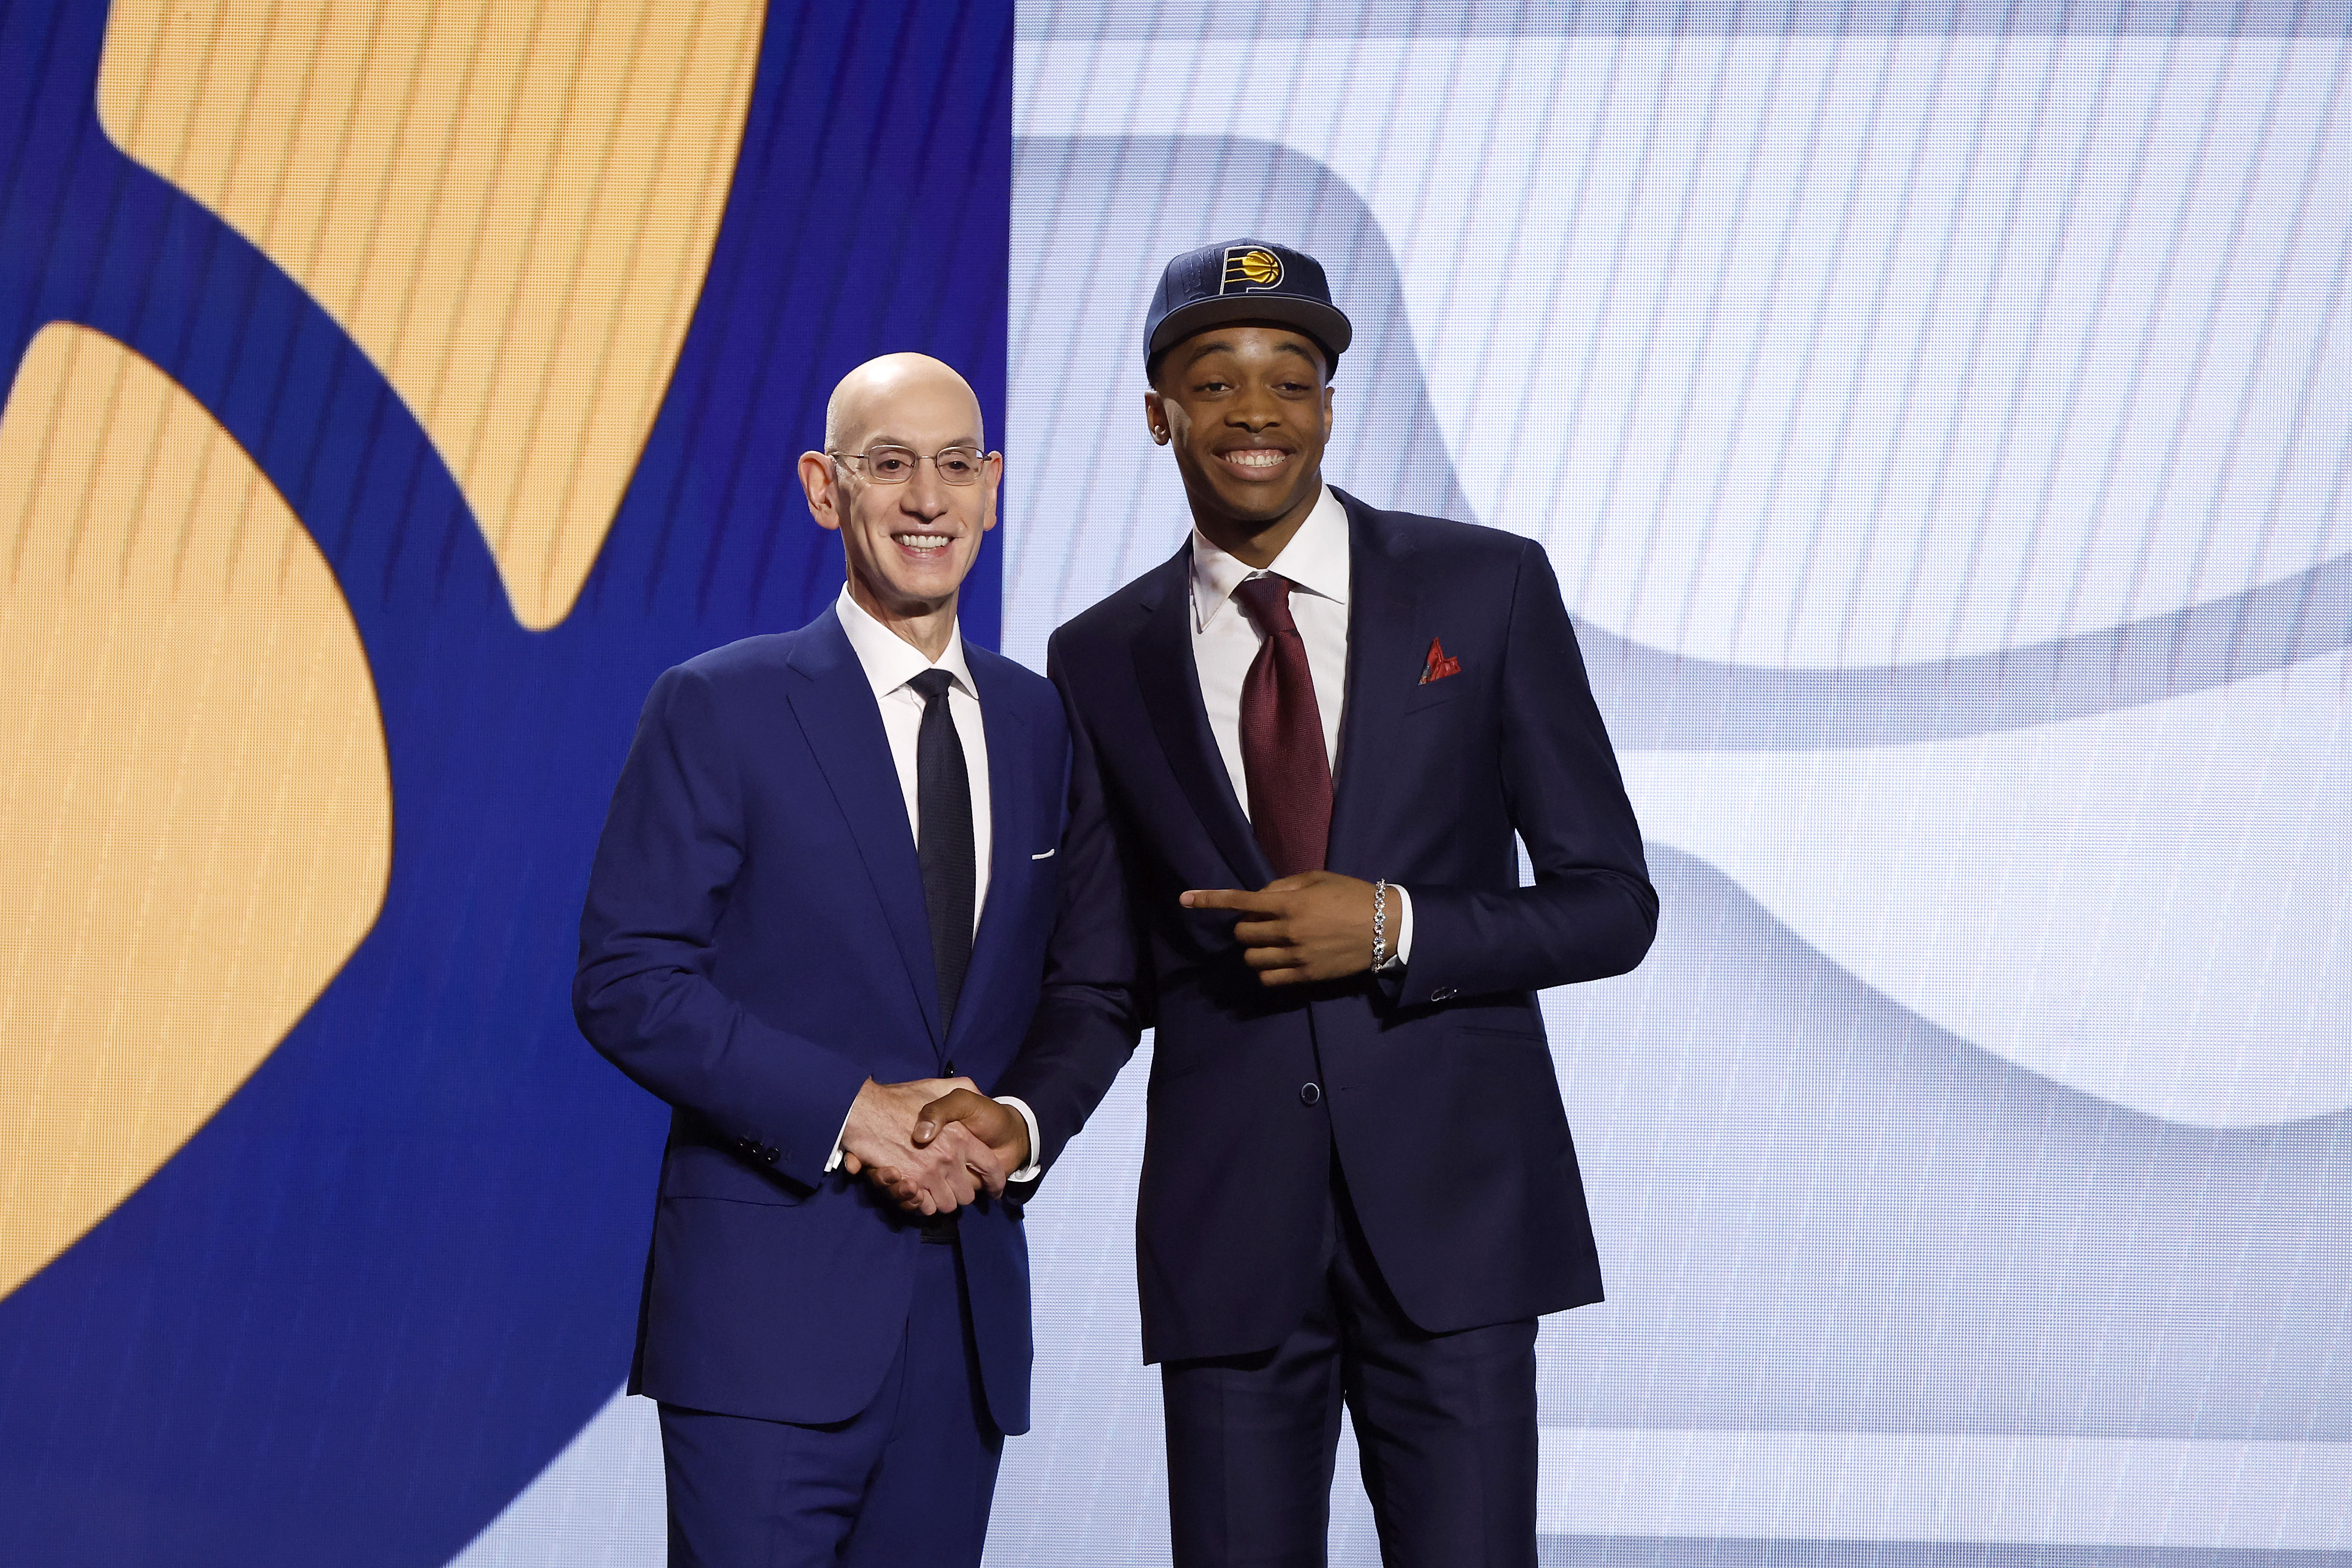 The Indiana Pacers select Bilal Coulibaly (R) from Metropolitans 92 with the seventh pick and trade him to the Washington Wizards in the NBA Draft at the Barclays Center in Brooklyn, New York City, June 22, 2023. /CFP